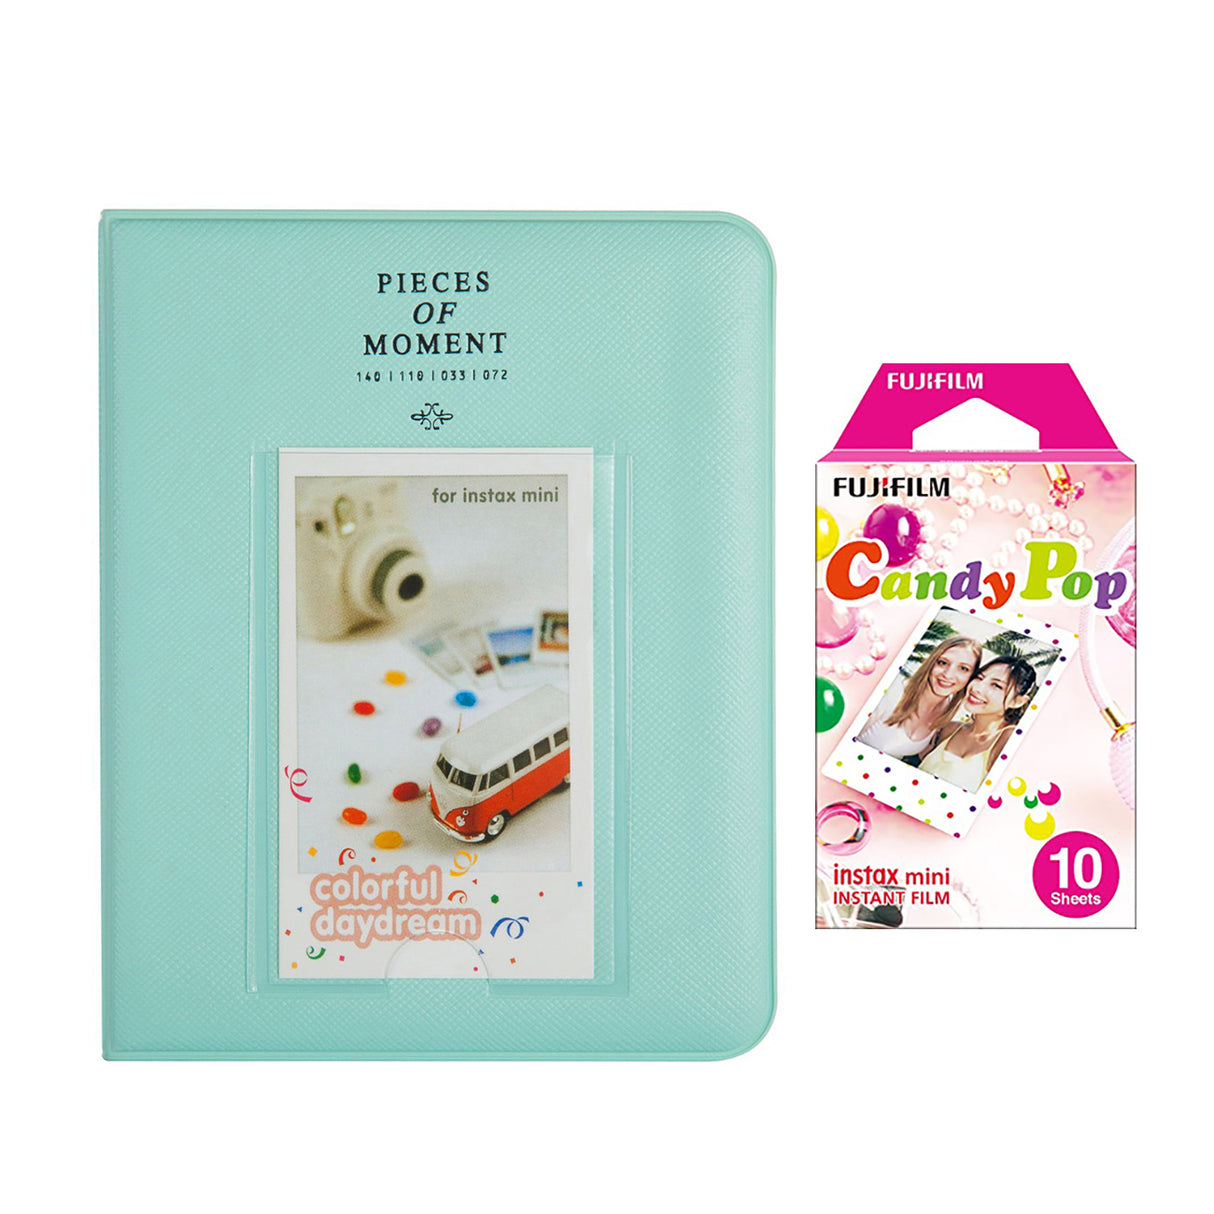 Fujifilm Instax Mini 10X1 candy pop Instant Film with Instax Time Photo Album 64 Sheets Ice blue